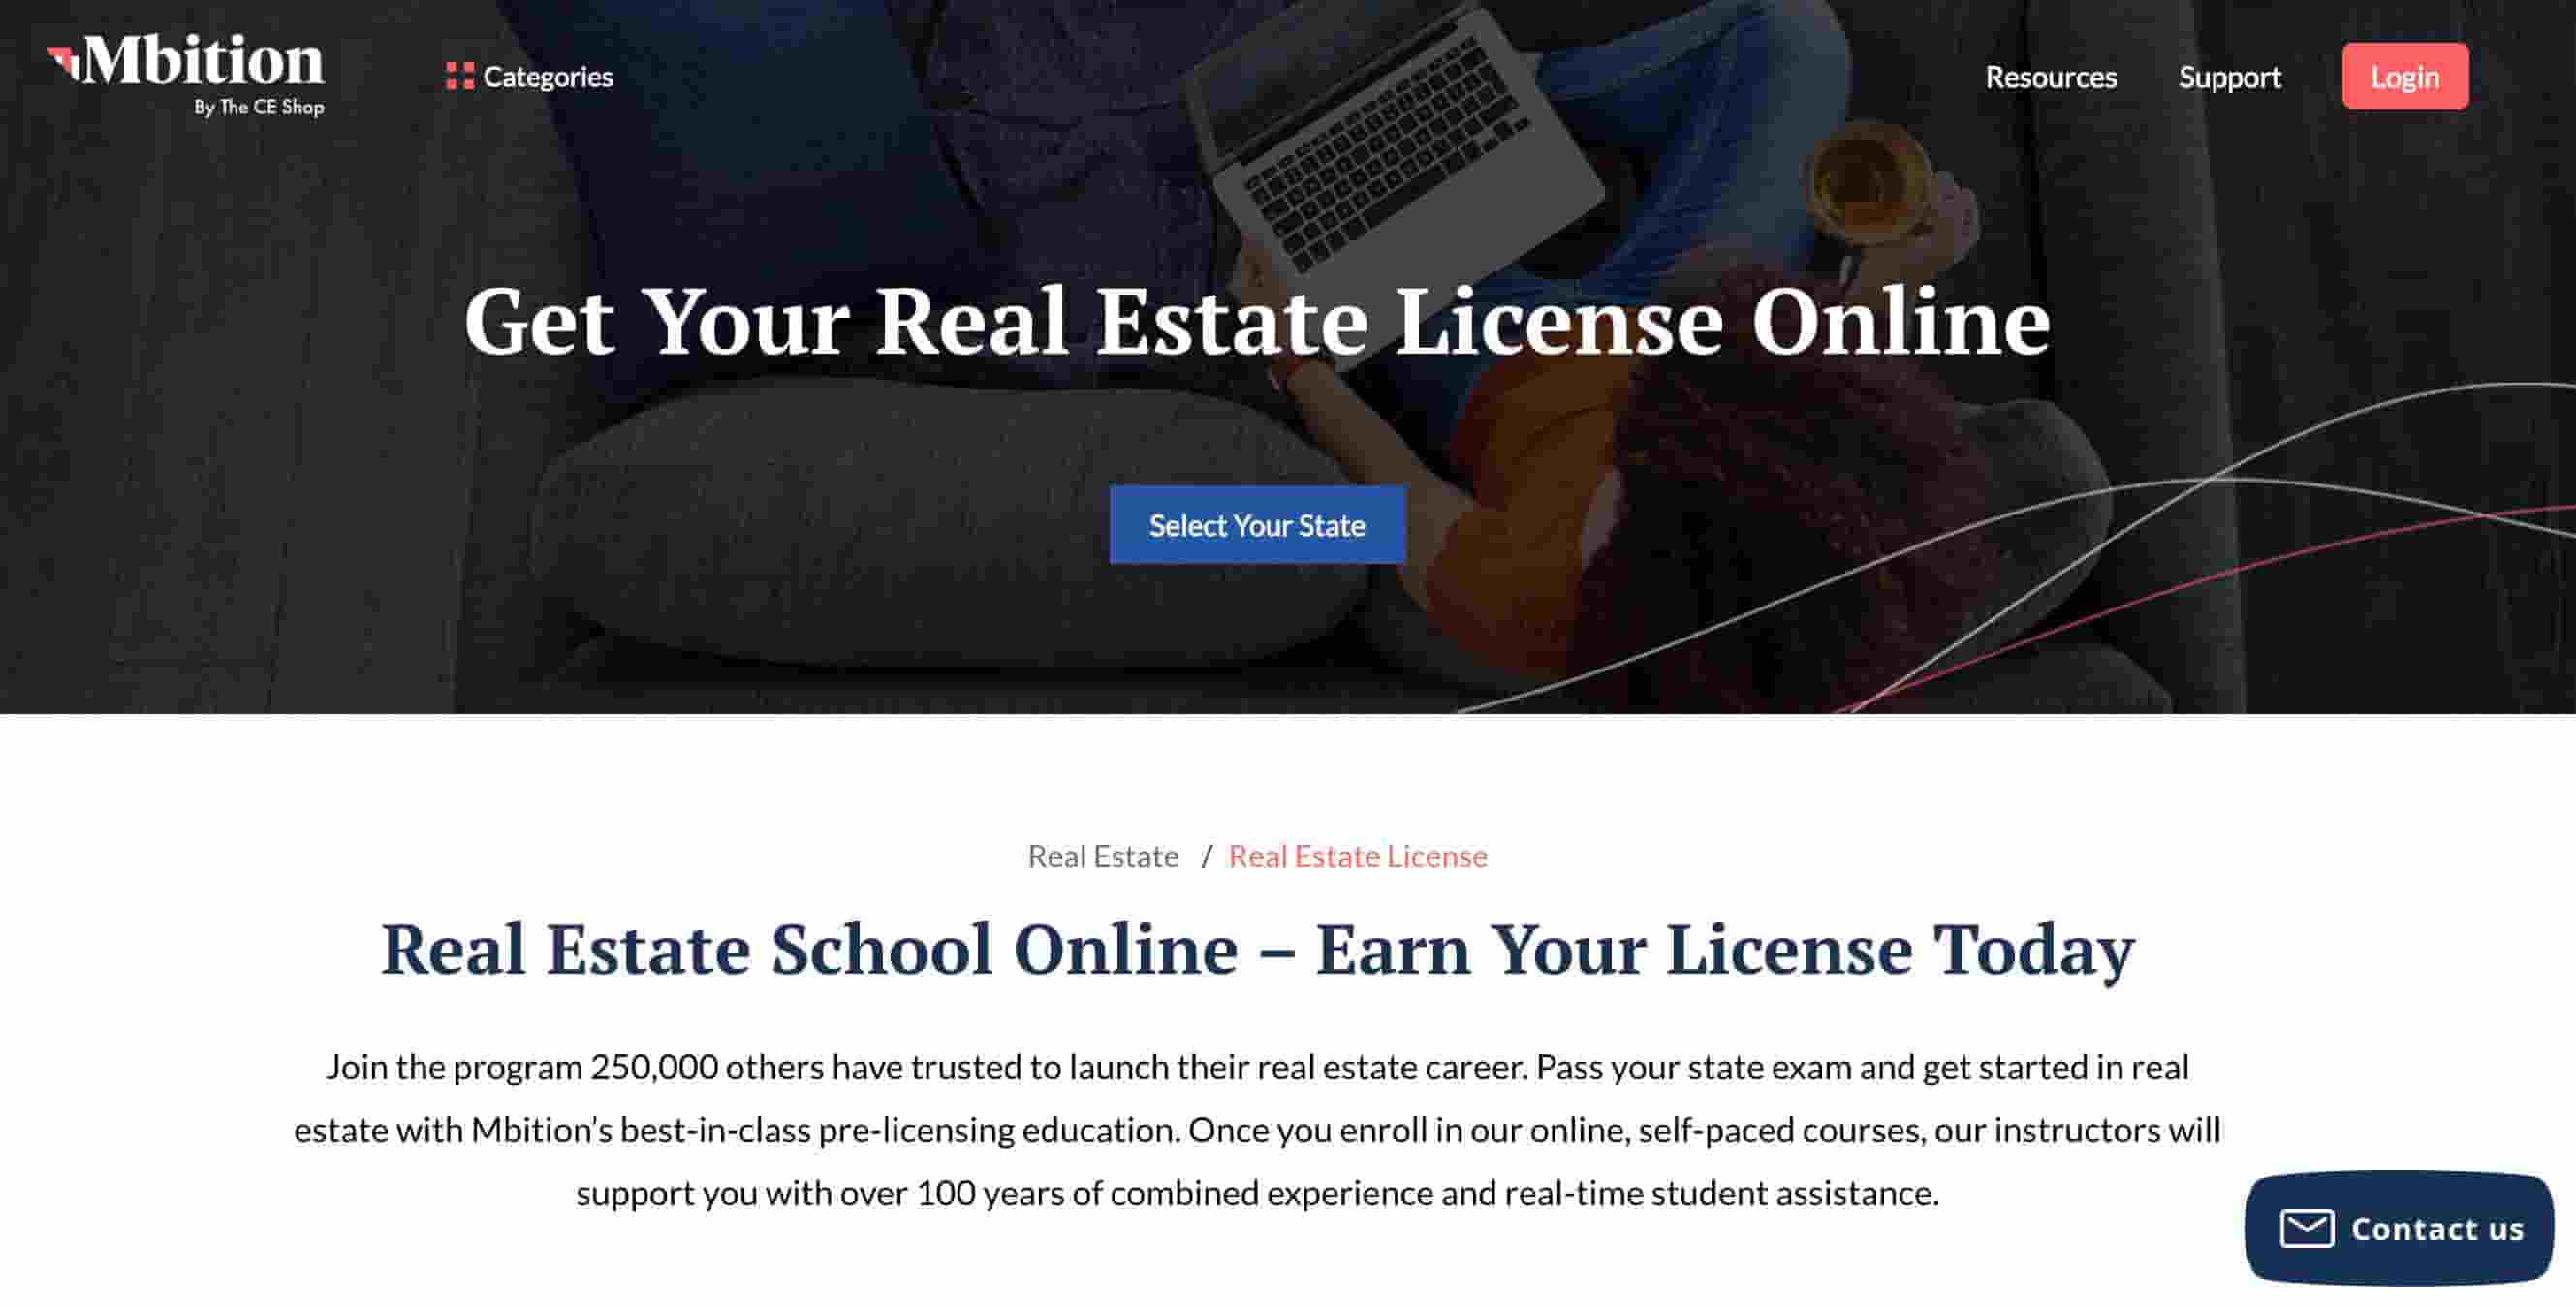 Mbition real estate homepage